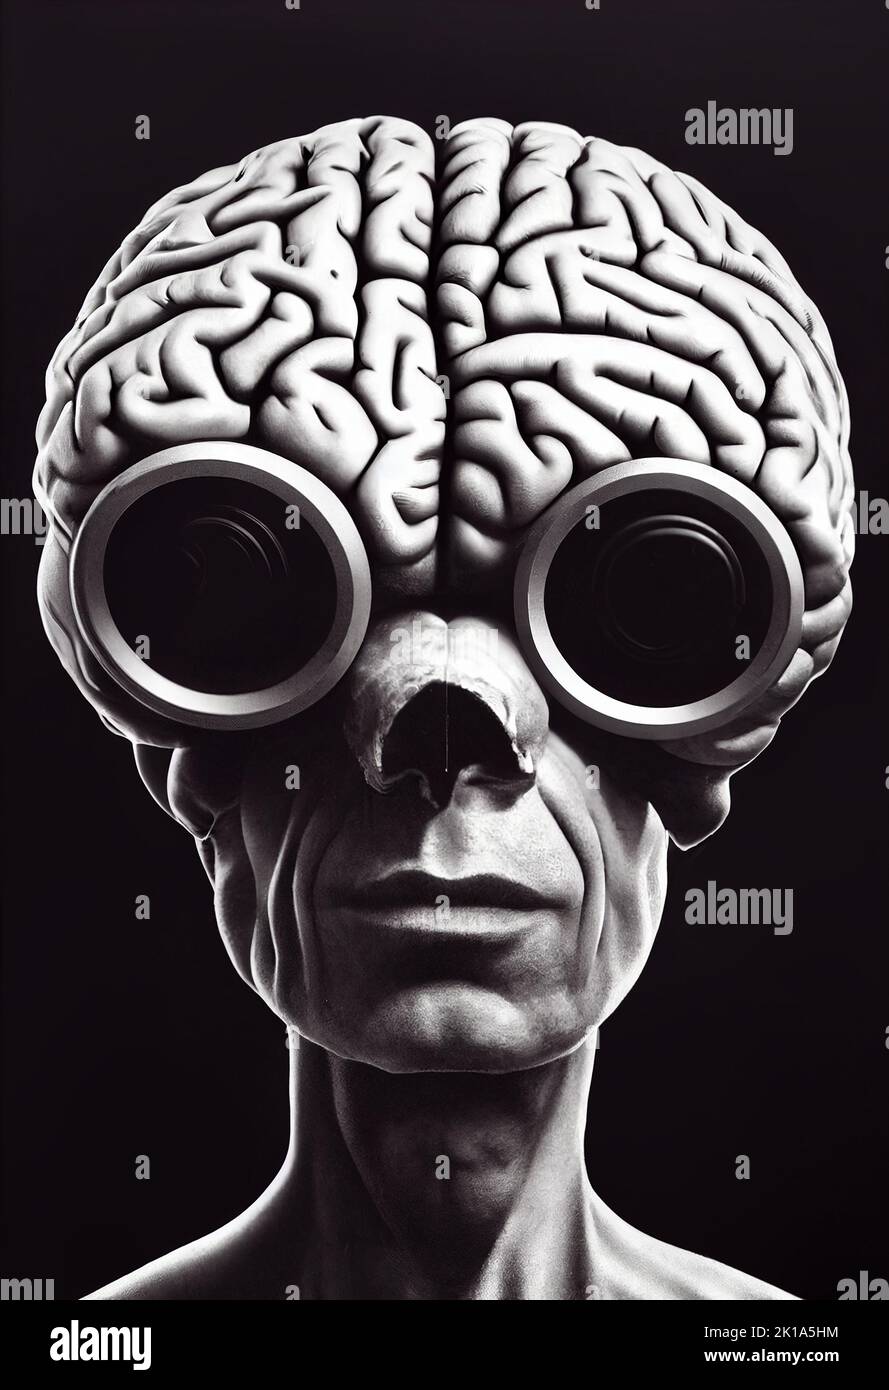 Illustration of a surreal portrait of a man with a brain and eyeglasses, skull face with broken nose, transhuman and articial intelligence Stock Photo